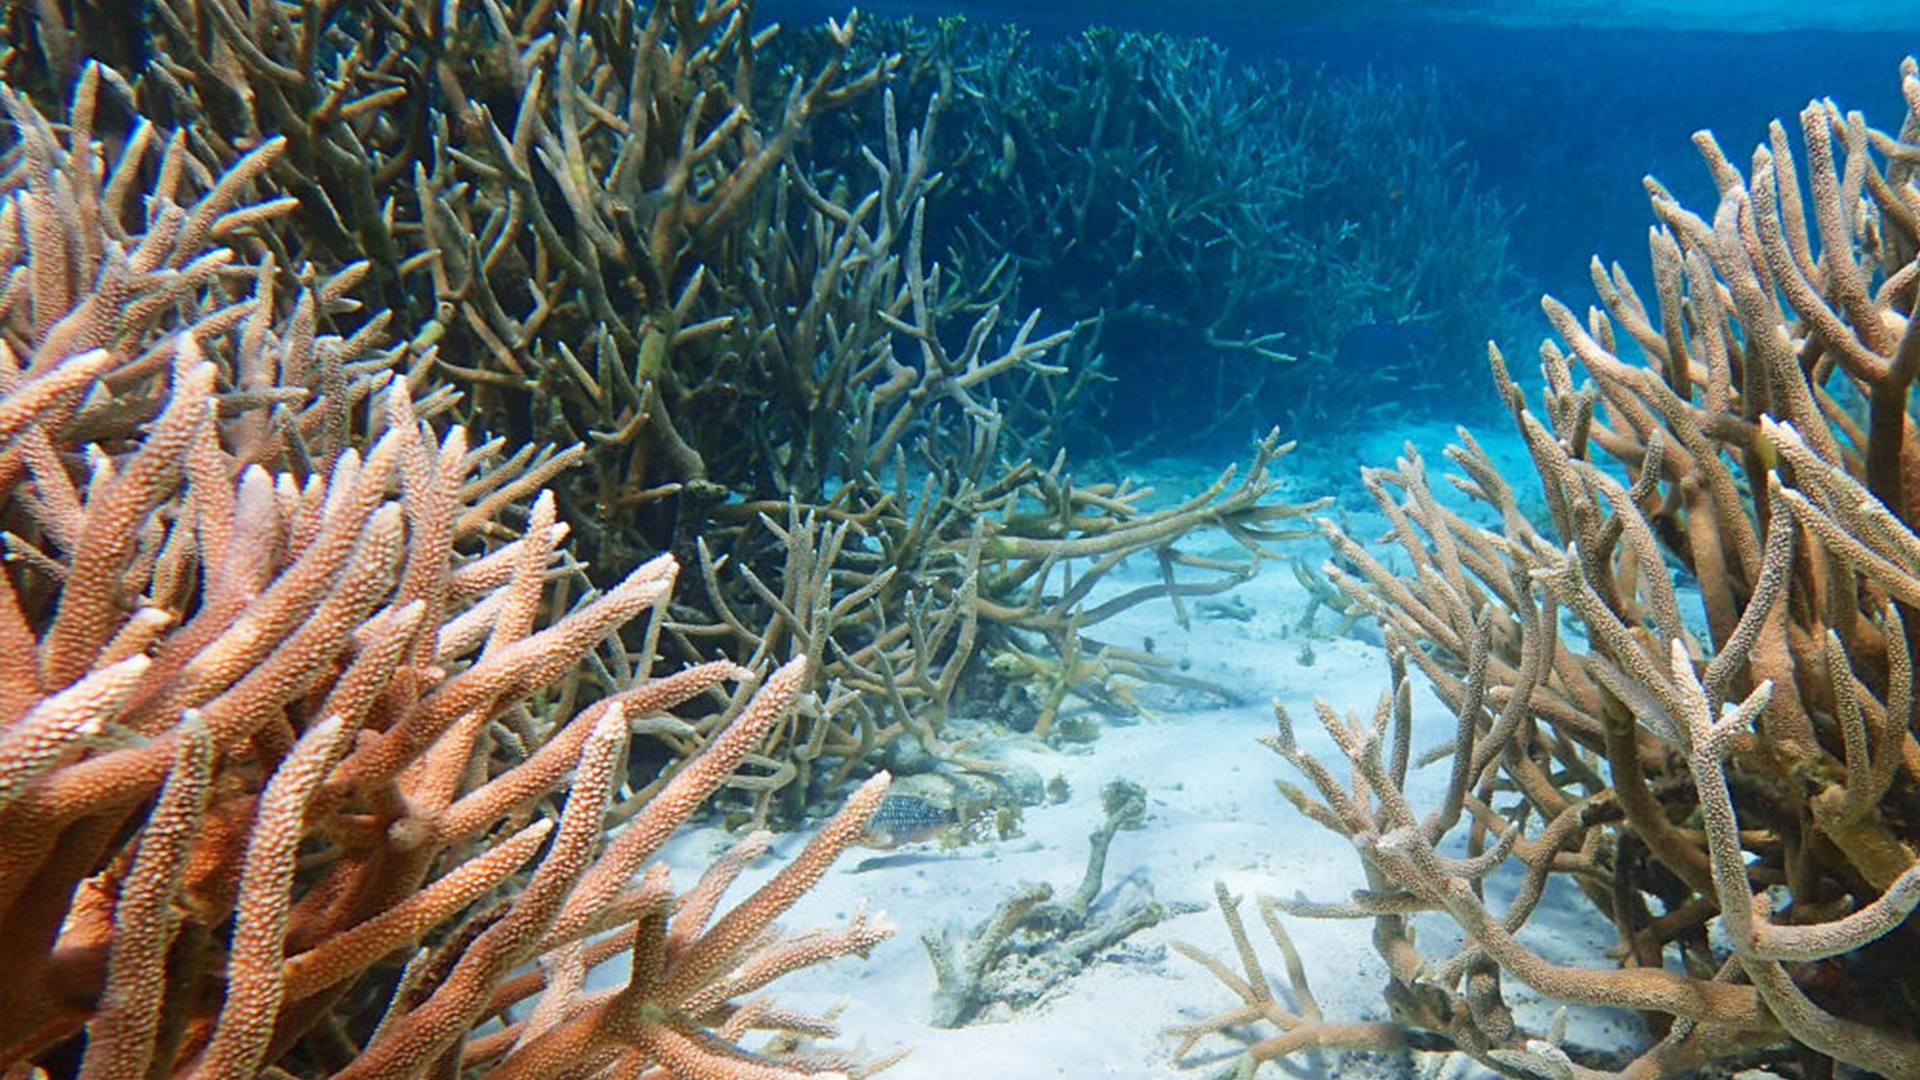 Ph.D. candidate helps guide research to support coral conservation